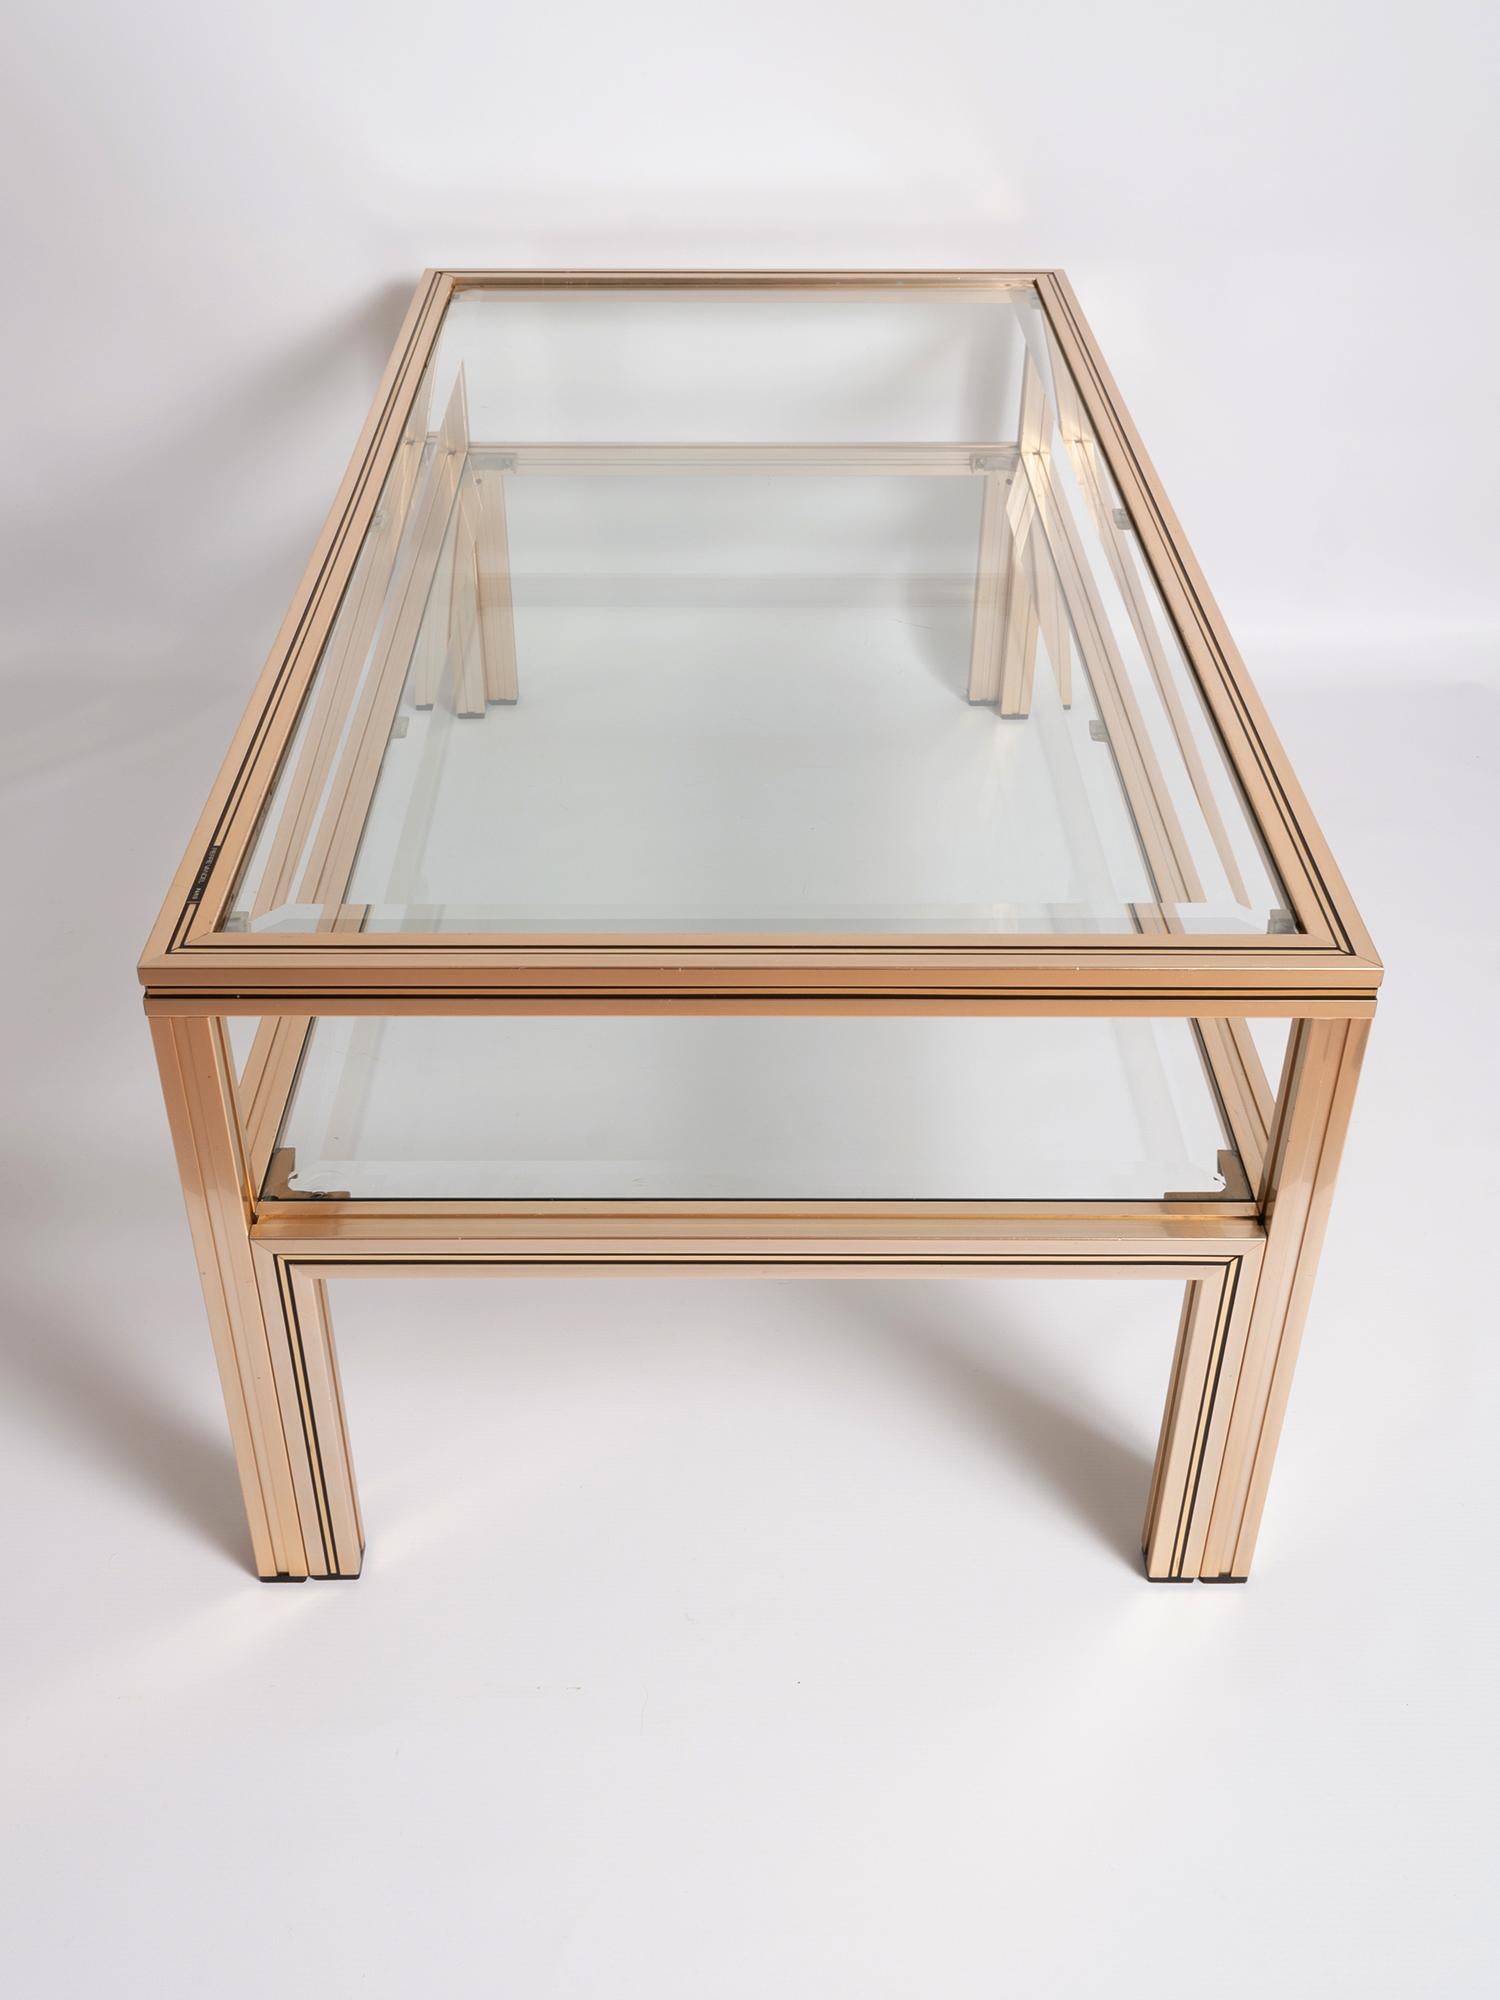 Late 20th Century Pierre Vandel Two-Tier Gold Coffee Table, France, circa 1970